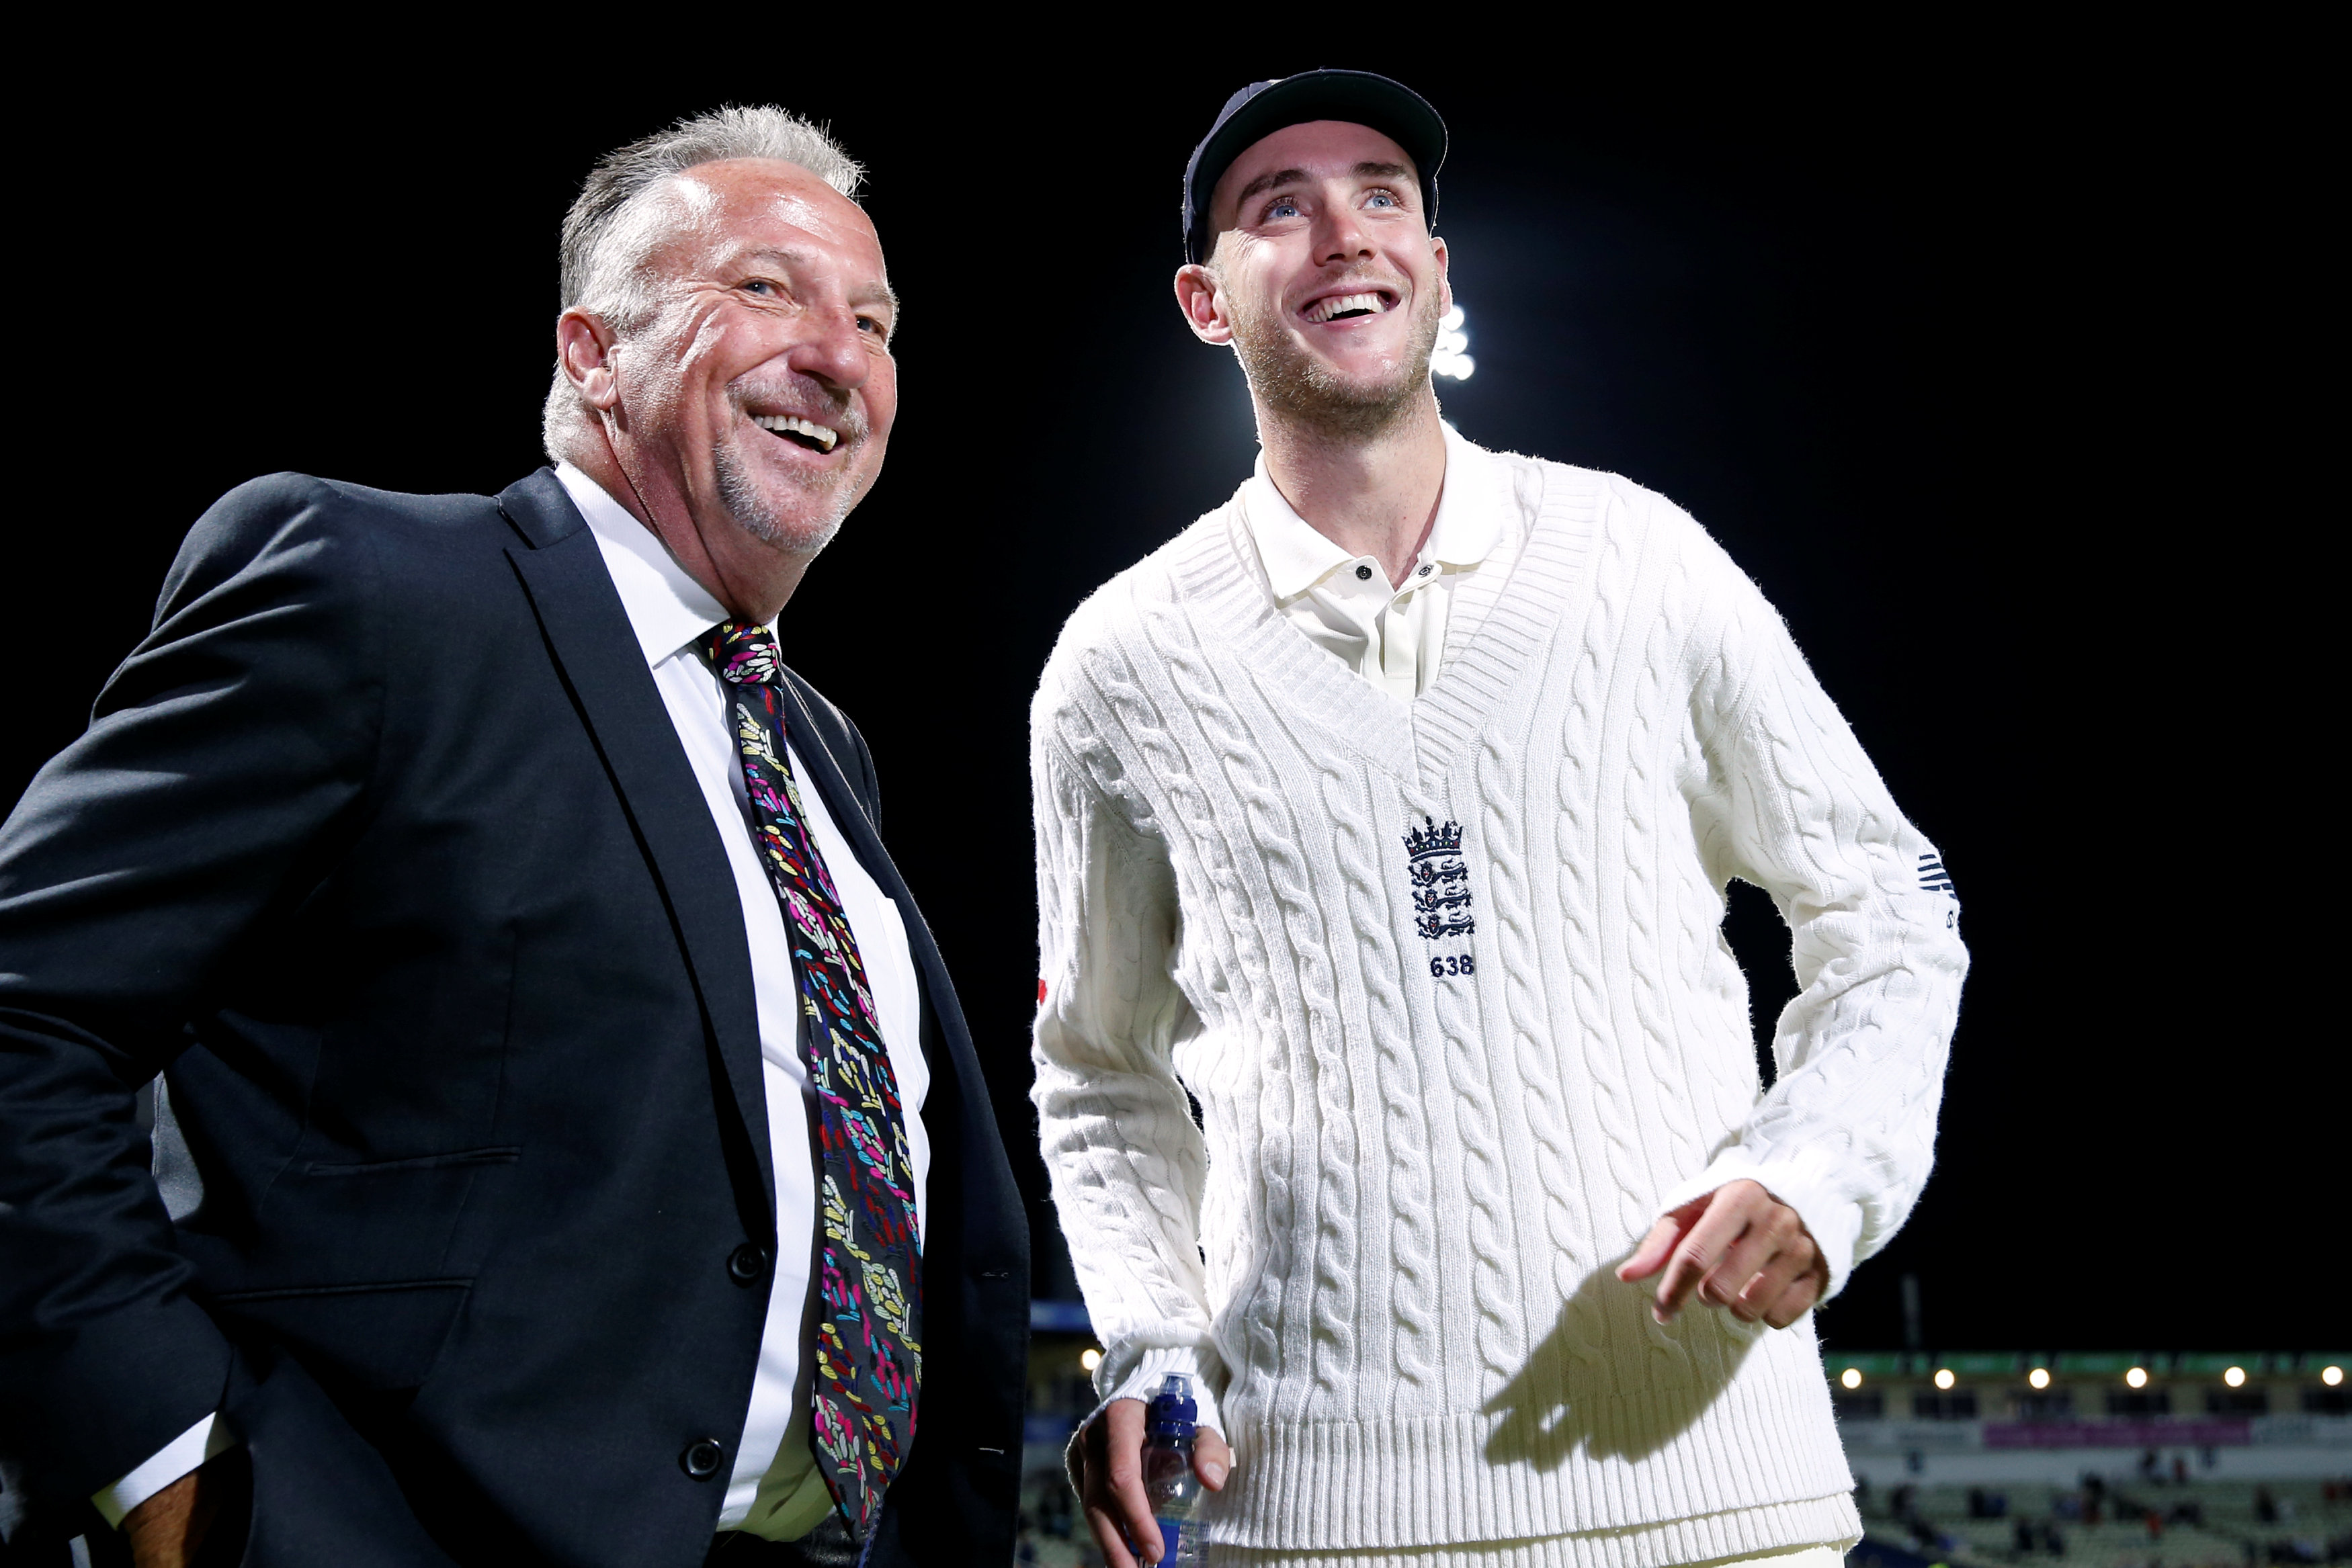 Cricket: Broad betters Botham as England rout West Indies in day-night Test